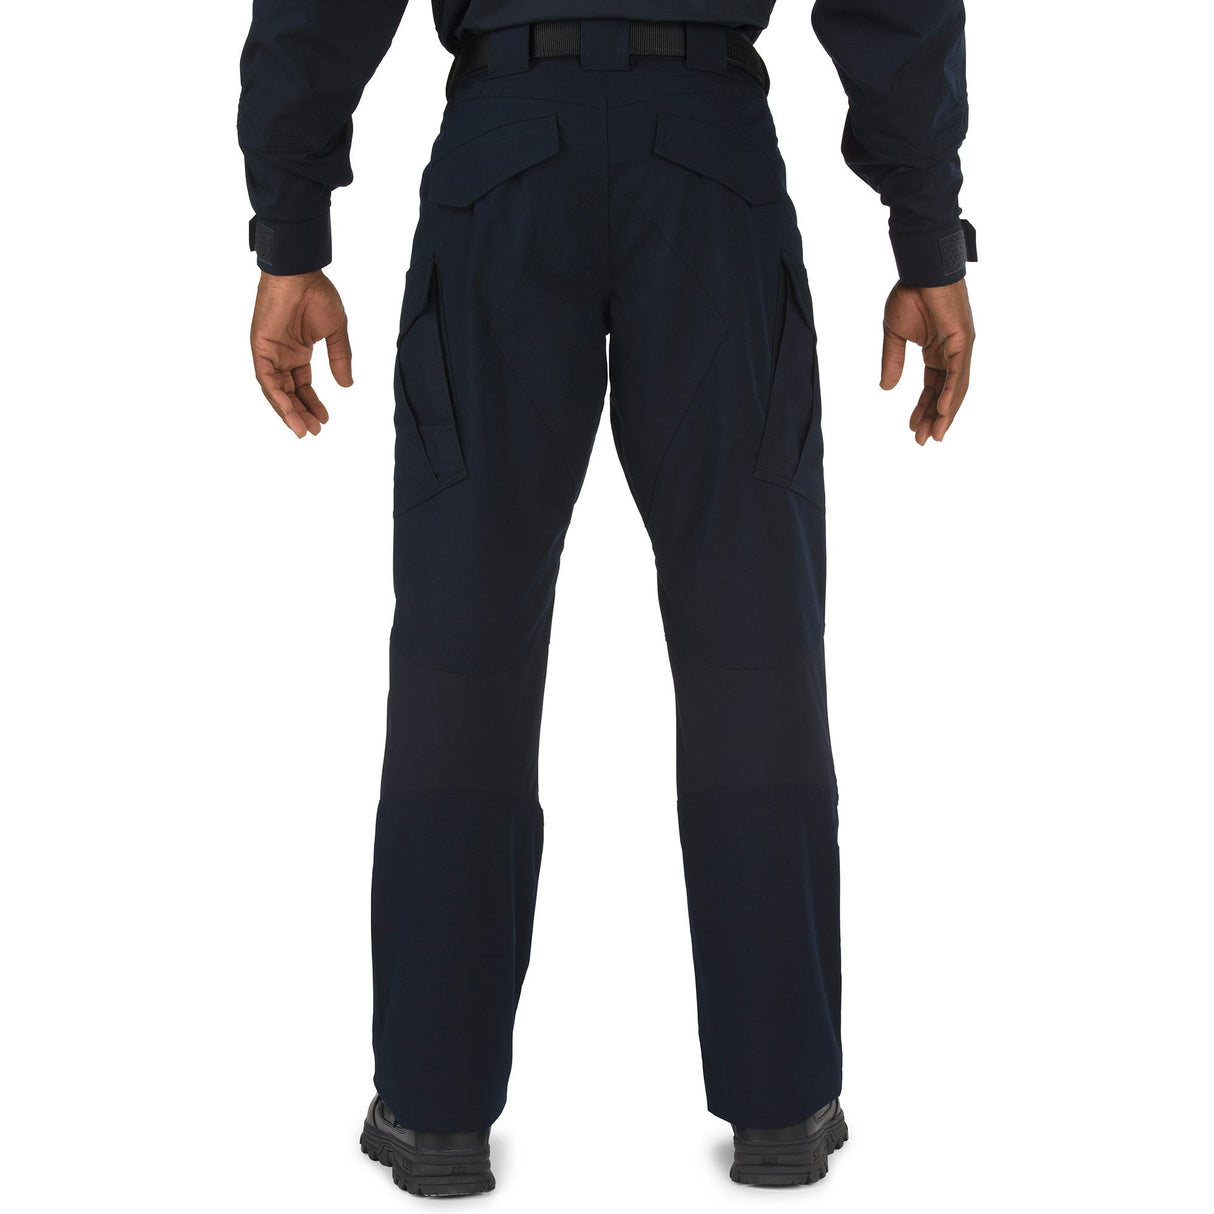 Canted Cargo Pockets Pant: Heightened storage capacity for essentials.